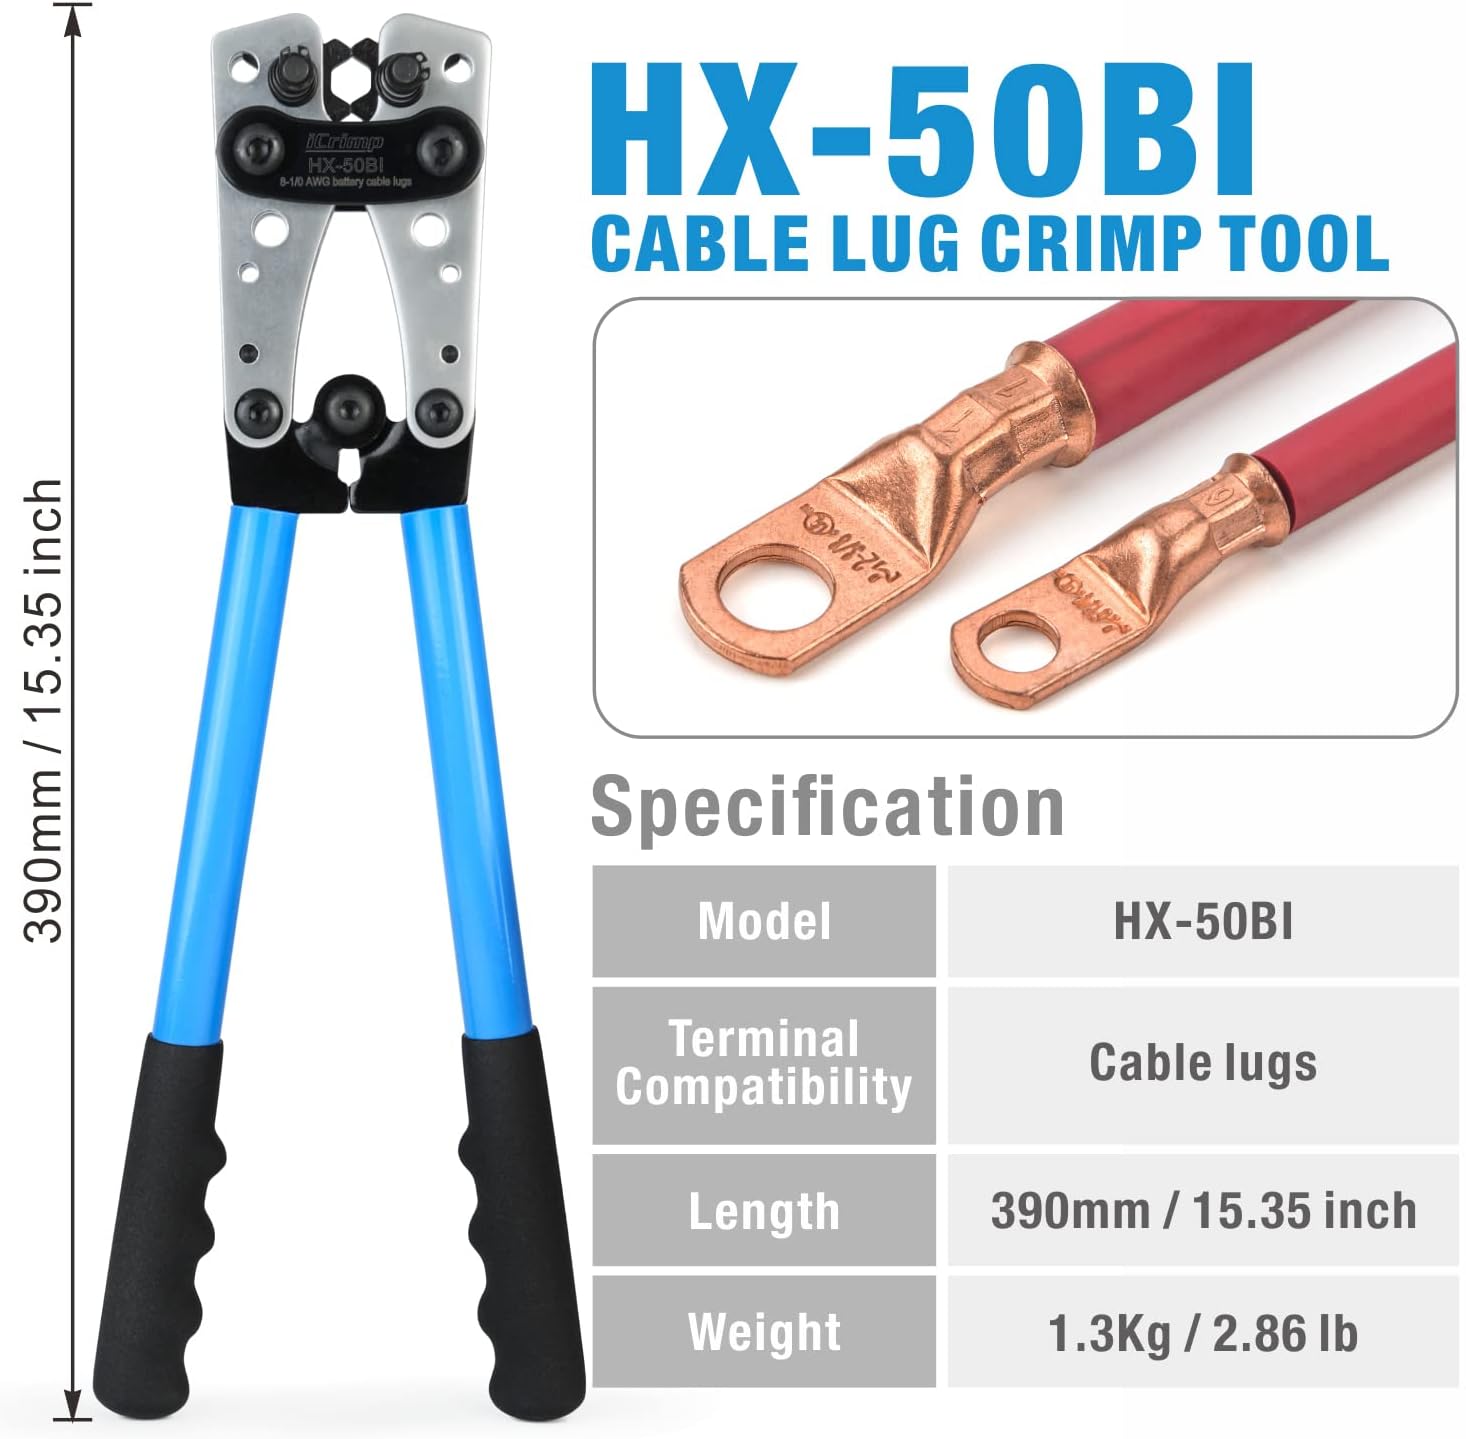 Icrimp Battery Cable Lug Crimping Tool for 8, 6, 4, 2, 1, 1/0 AWG Heavy Duty Wire Copper Lugs, Battery Terminal, with Wire Shear Cutter